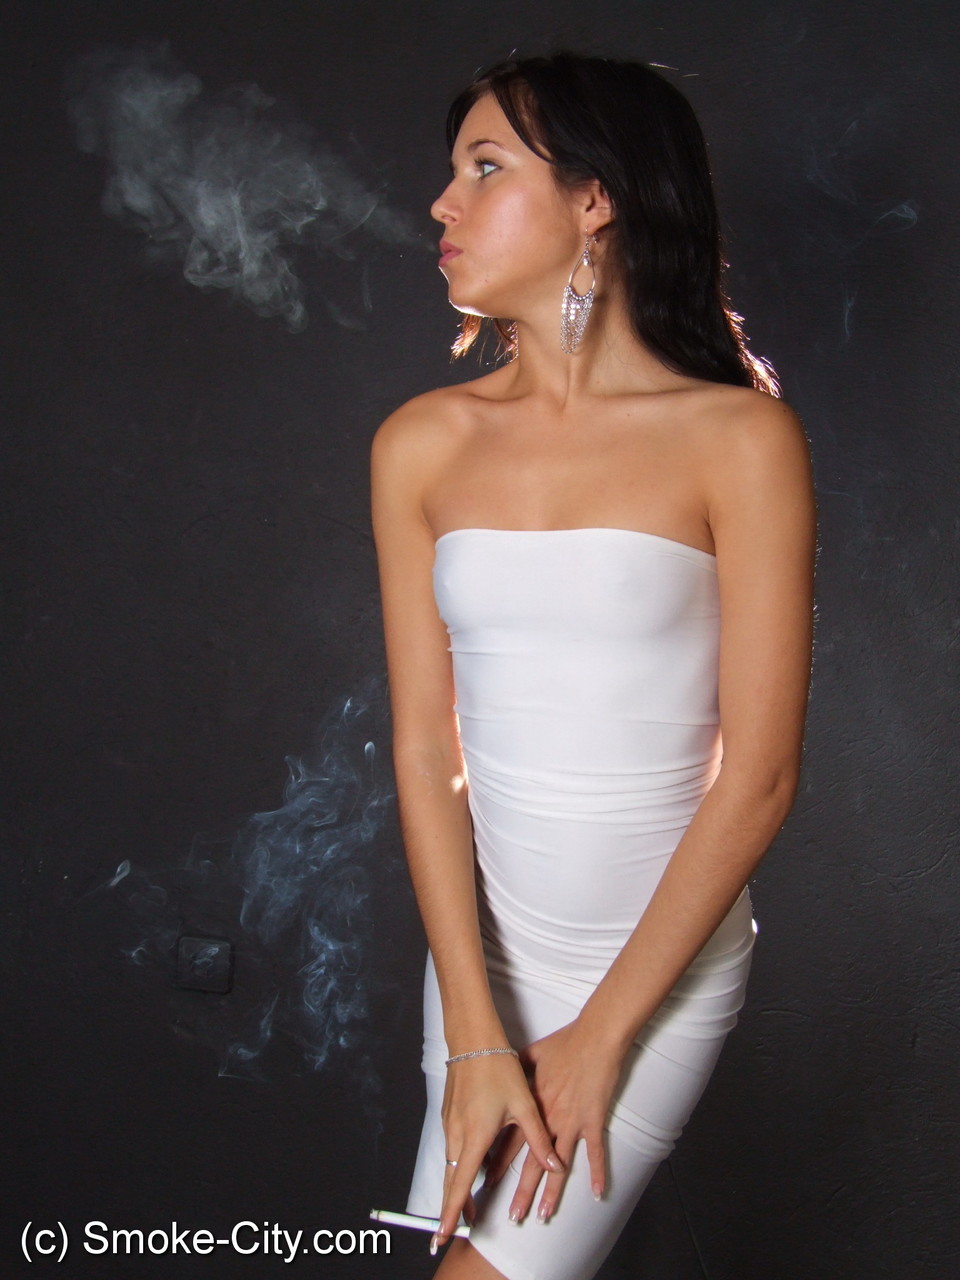 Young brunette smokes a cigarette while wrapped in tight white dress and heels 色情照片 #426521983